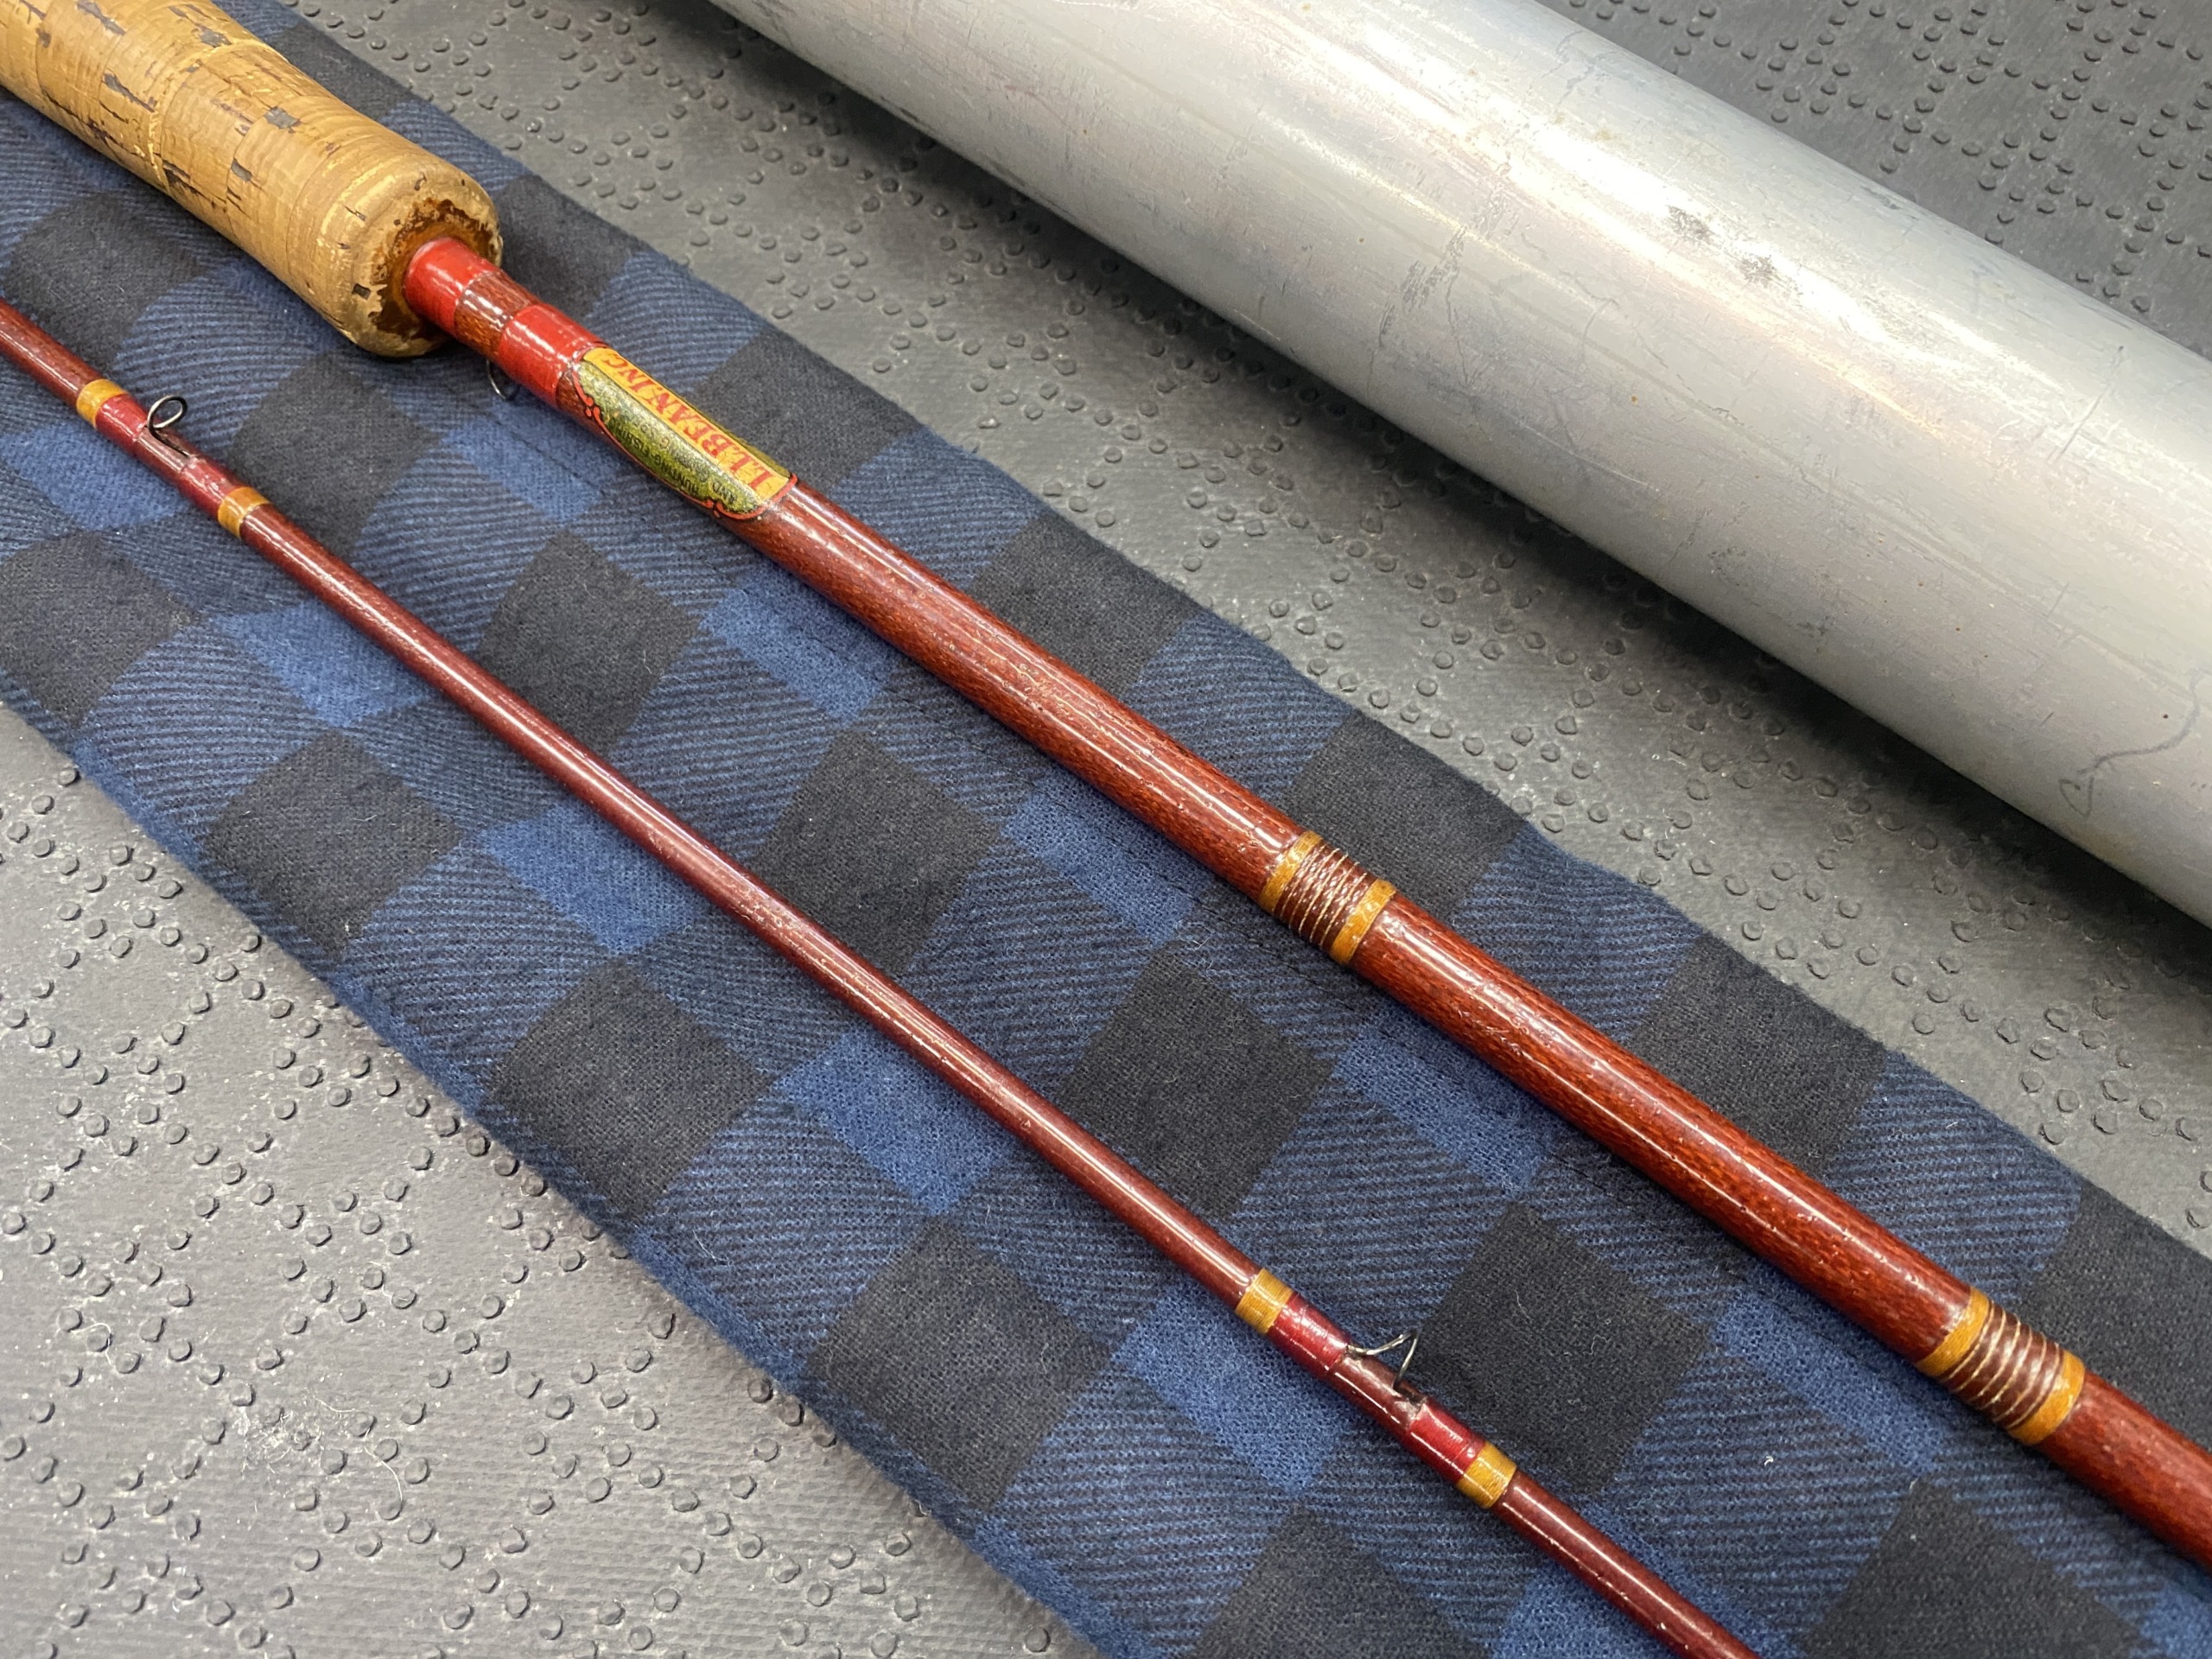 https://thefirstcast.ca/wp-content/uploads/2021/08/LL-Bean-7-12-Conolon-Two-Piece-Fiberglass-Fly-Rod-Comes-with-a-Peerless-Rod-Tube-B-scaled.jpg